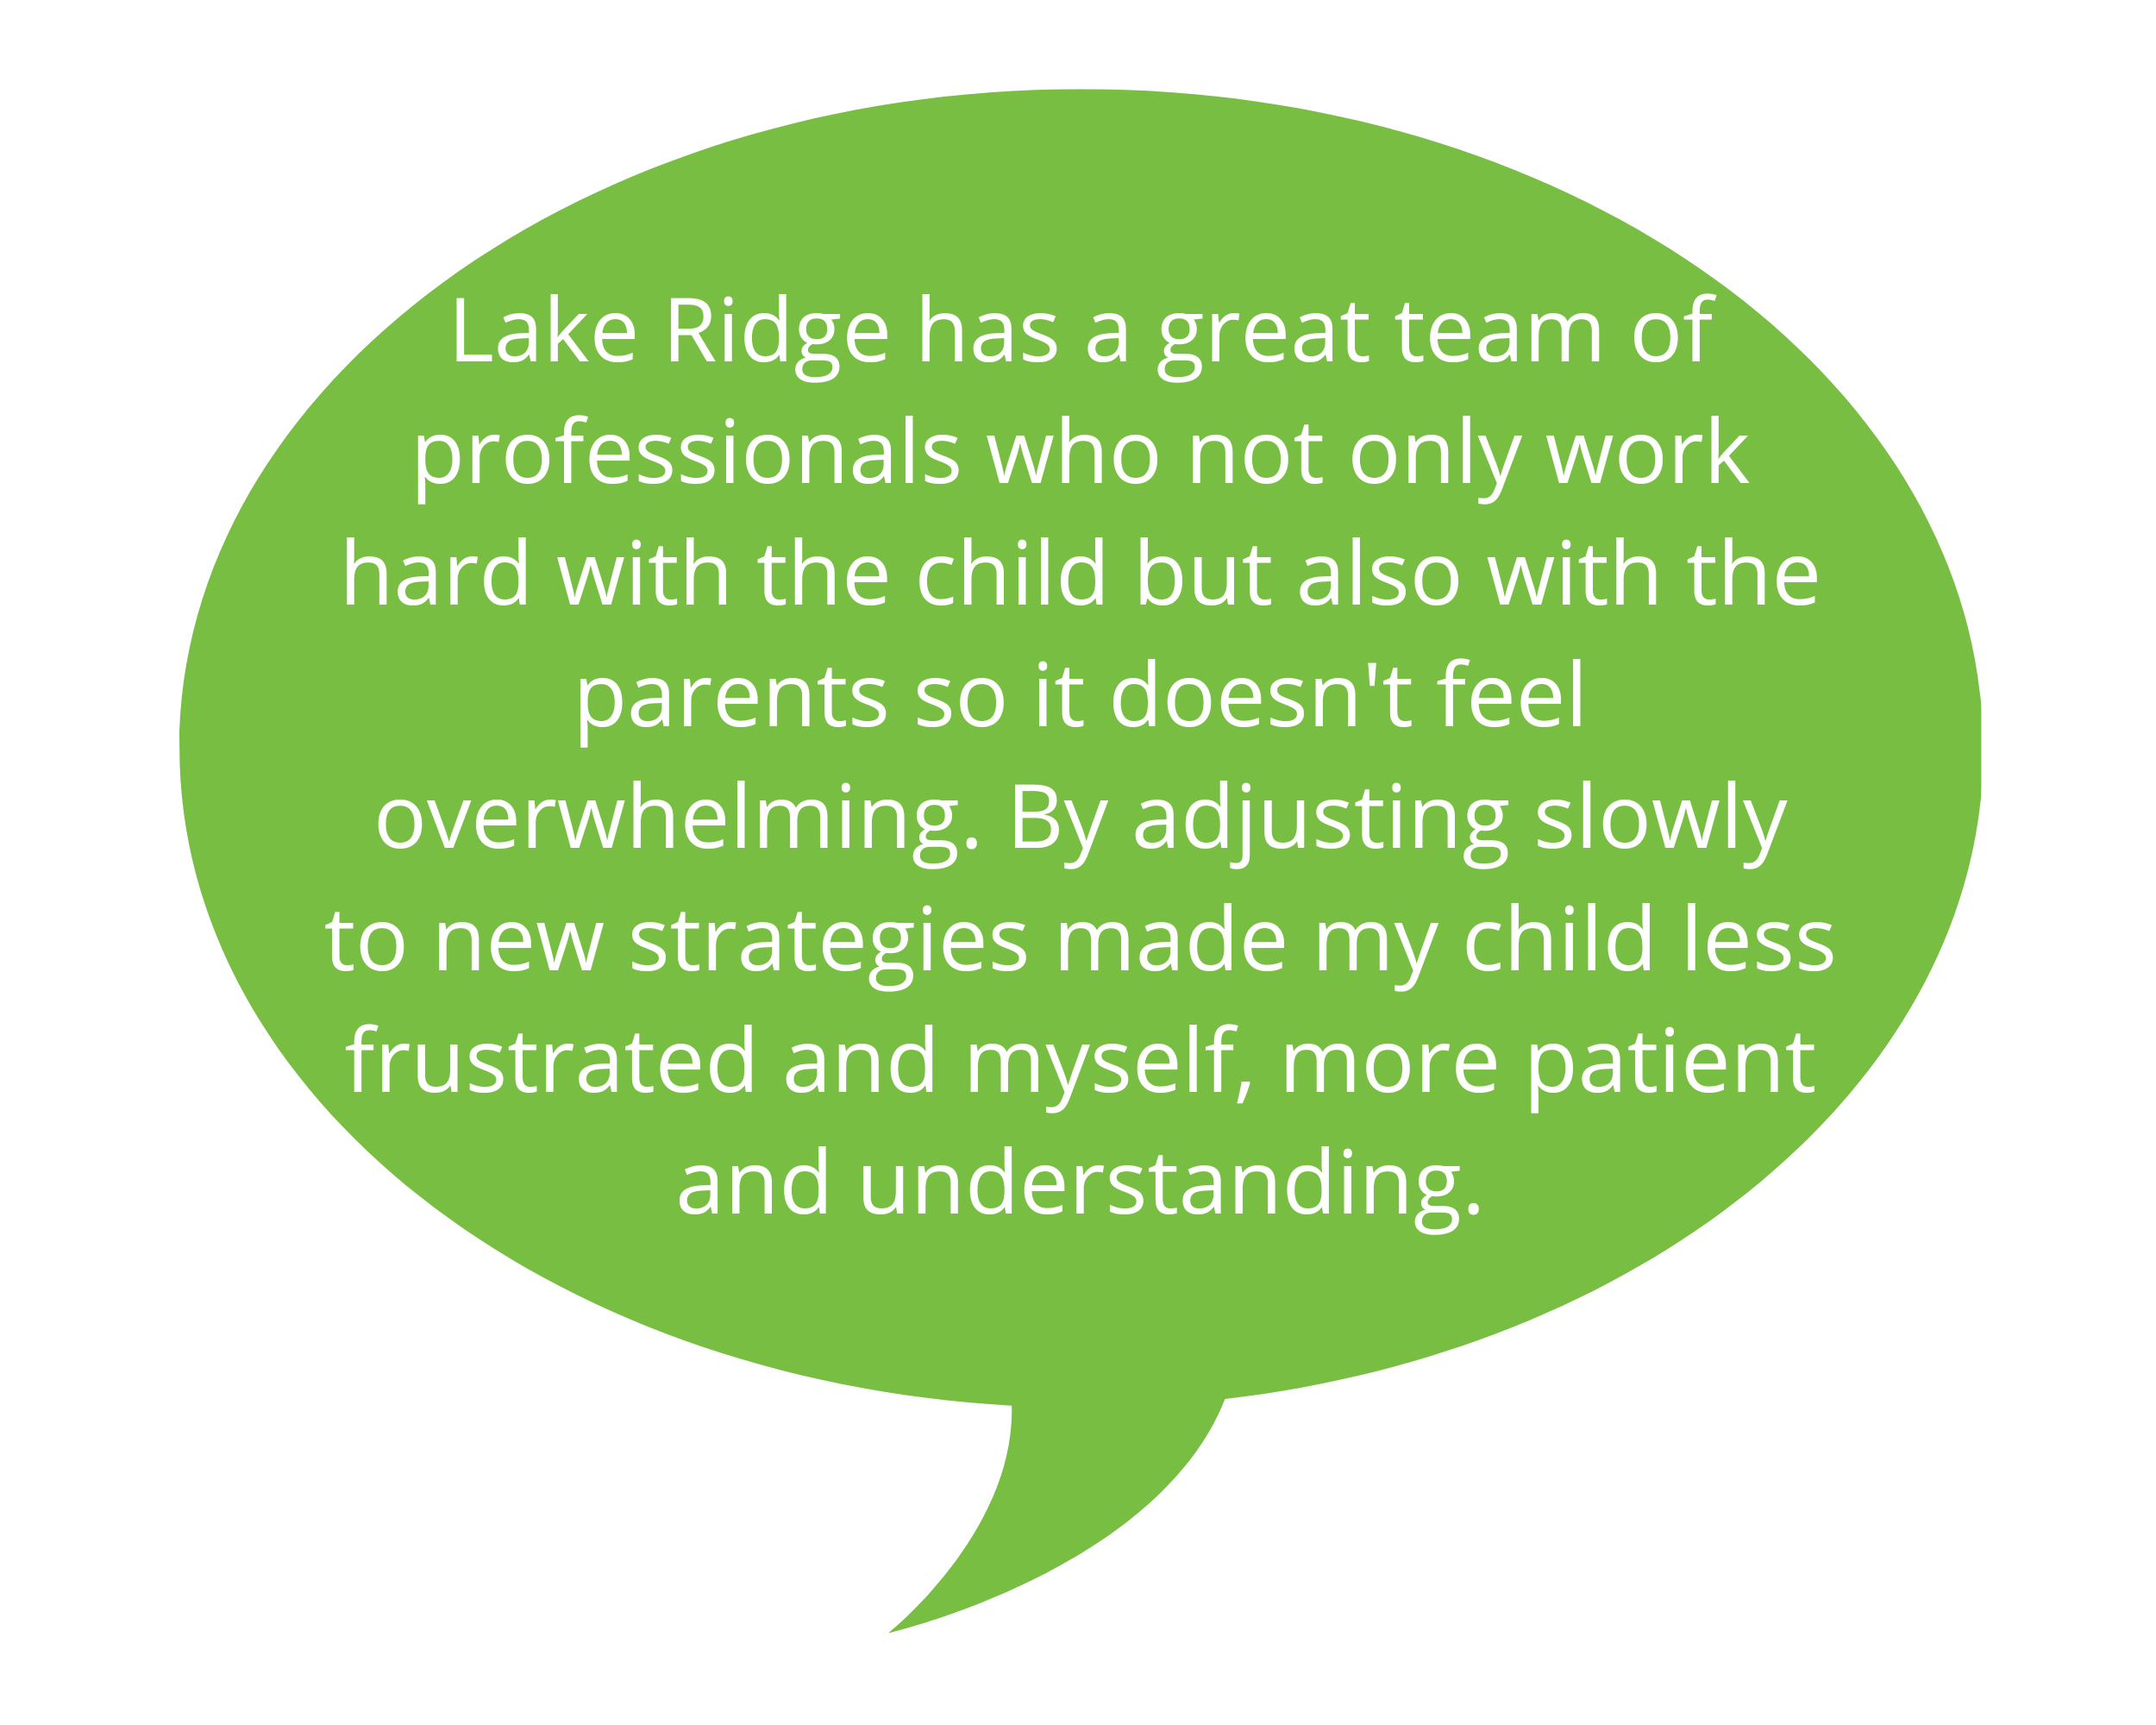    Lake Ridge has a great team of professionals who not only work hard with the child but also with the parents so it doesn't feel overwhelming. By adjusting slowly to new strategies made my child less frustrated and myself, more patient and understa